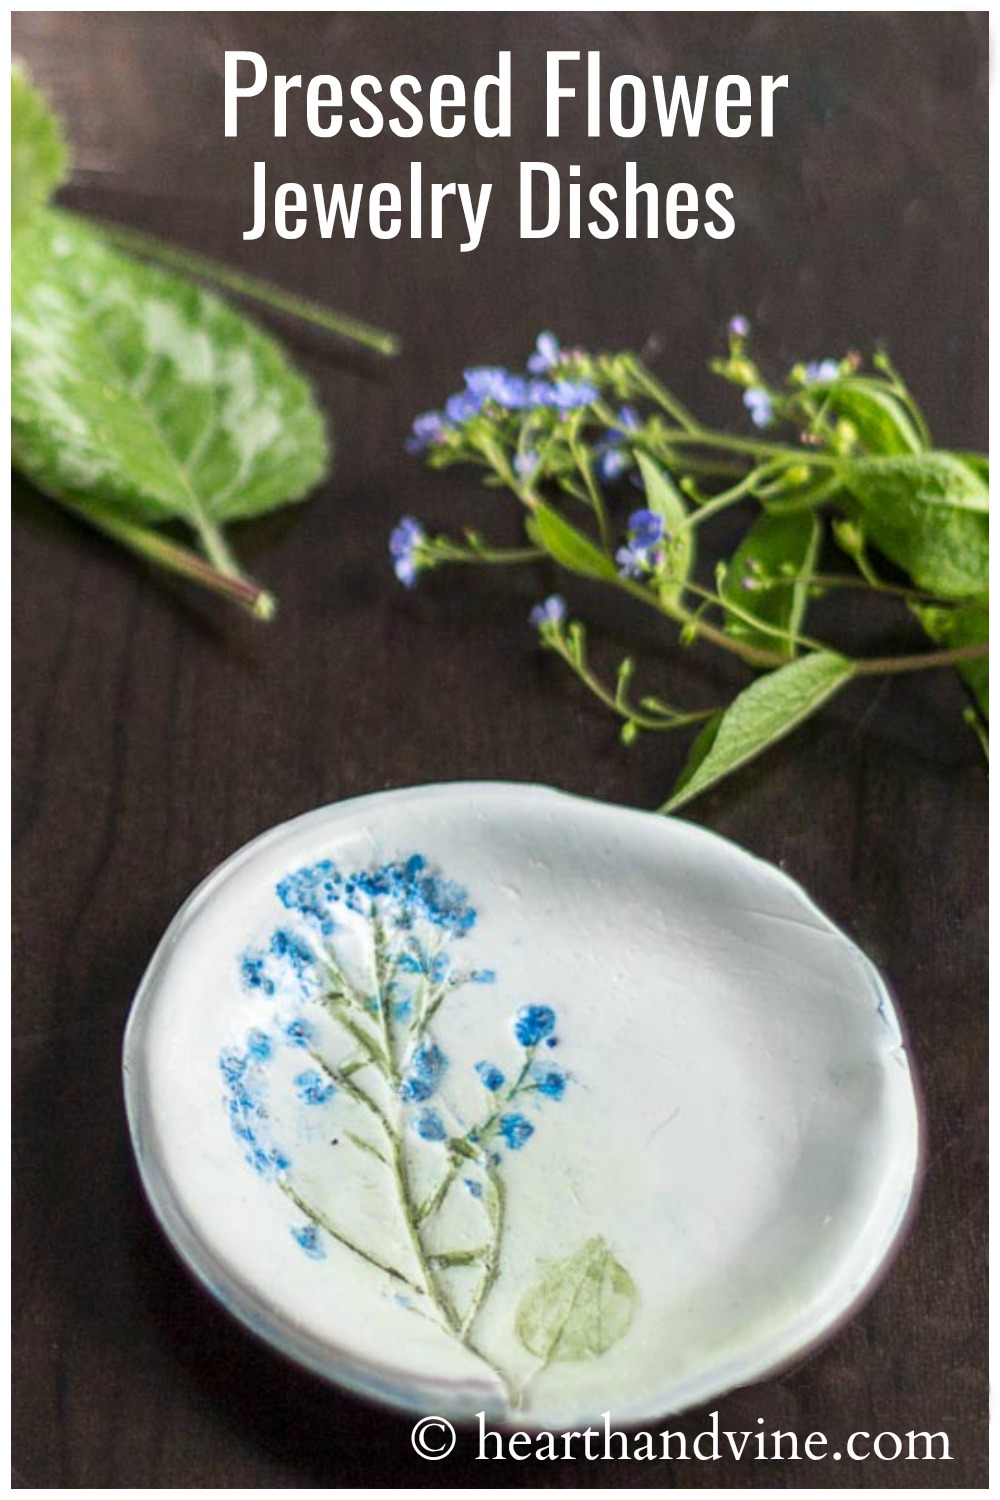 Flowers and pressed flower jewelry dish